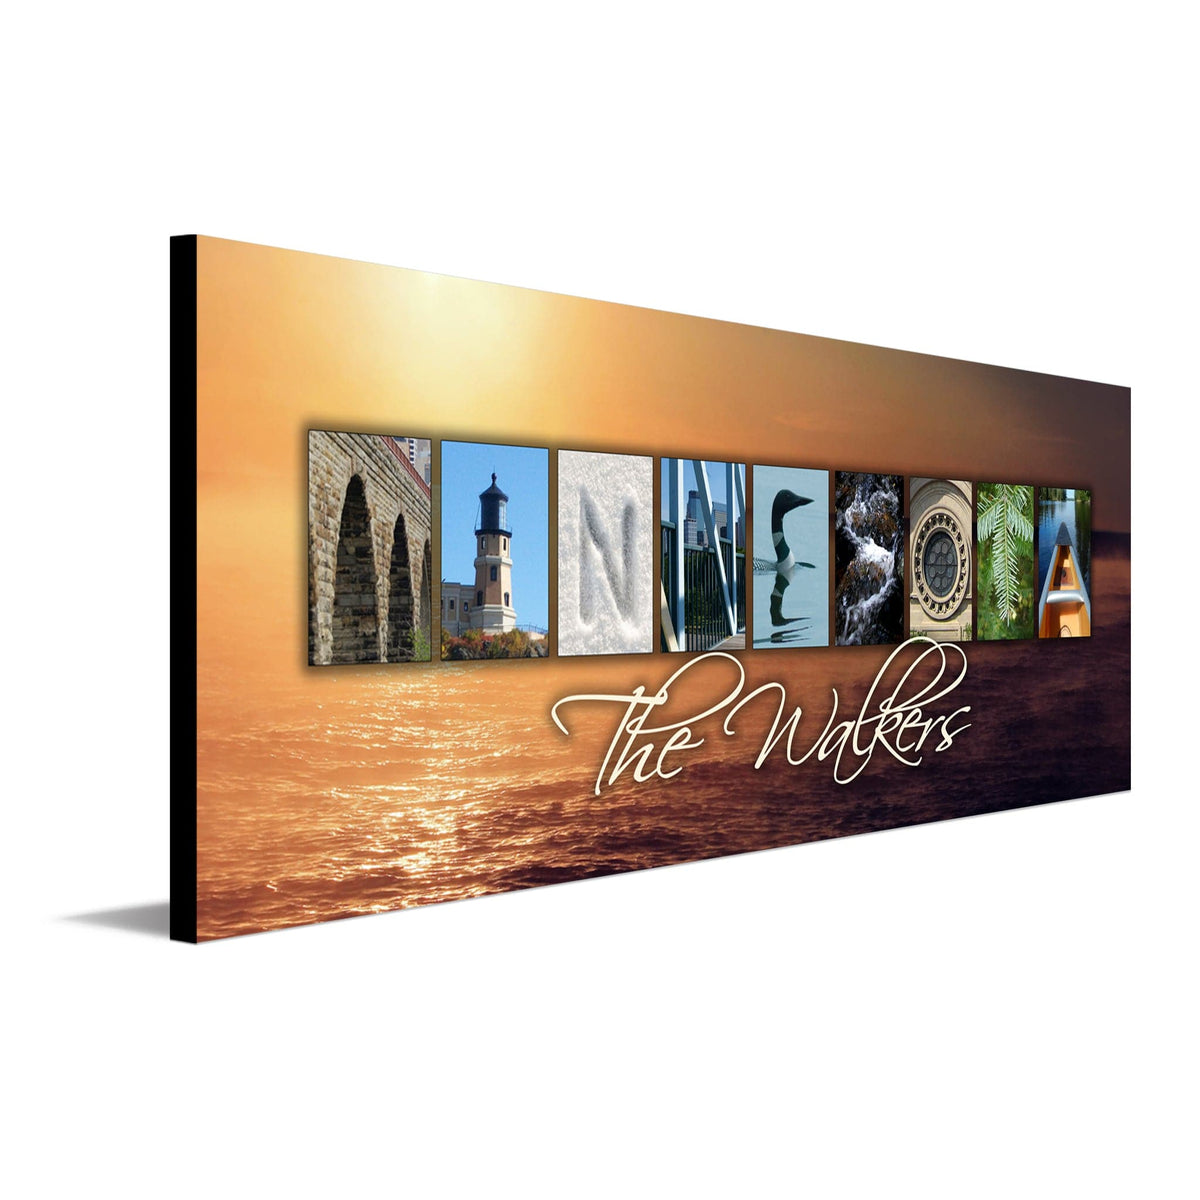 Minnesota wall art using images from the state to spell the word Minnesota - Personal-Prints